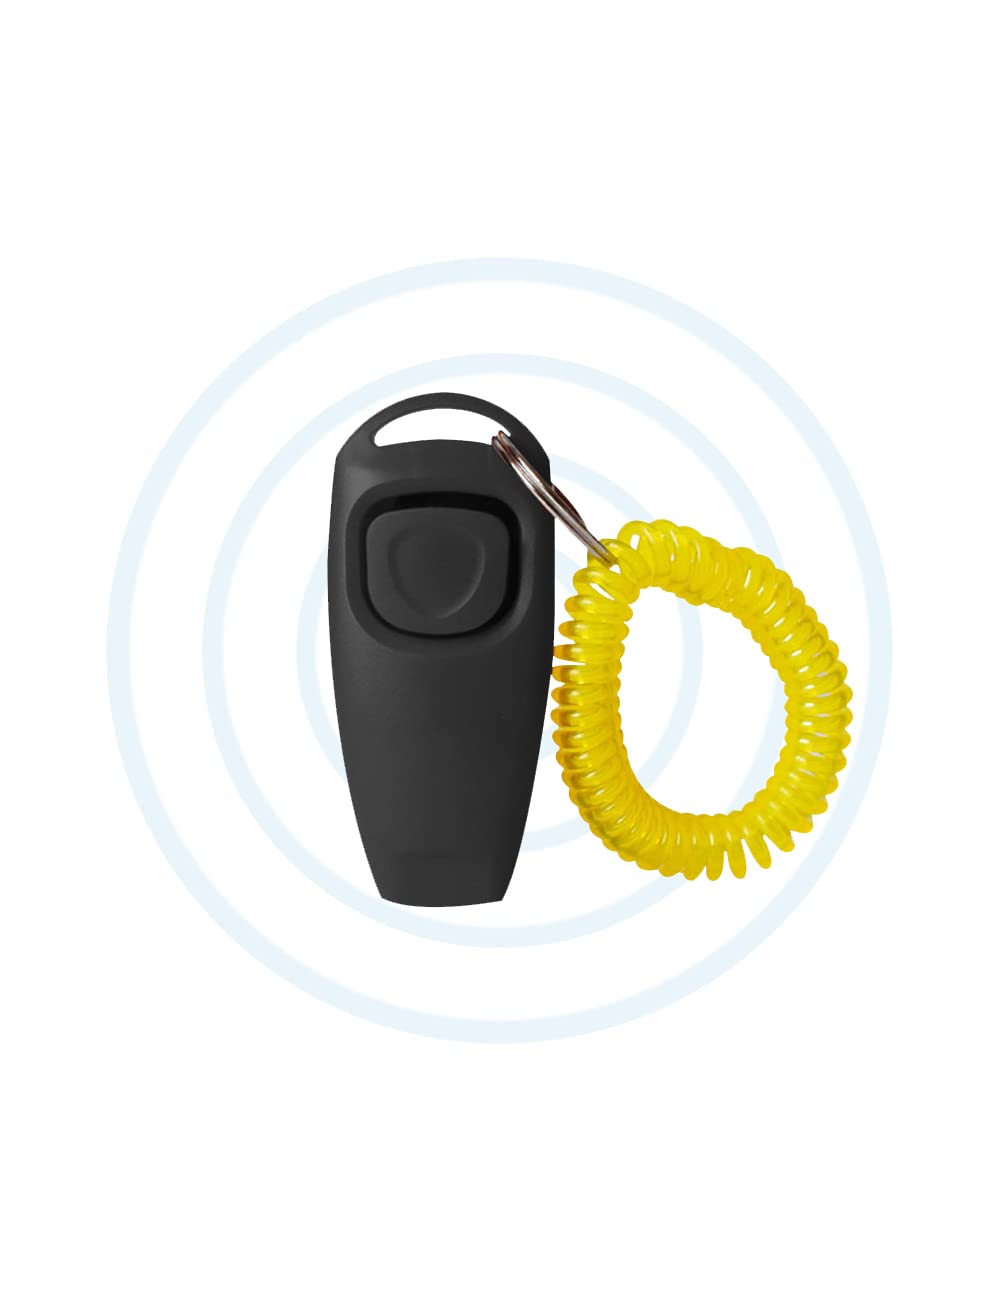 AHERO 2 in 1 Dog Whistle&Clicker, Dog Training Tool Make Dogs Come to You,Stop Barking,Behavior Aids Black - BeesActive Australia